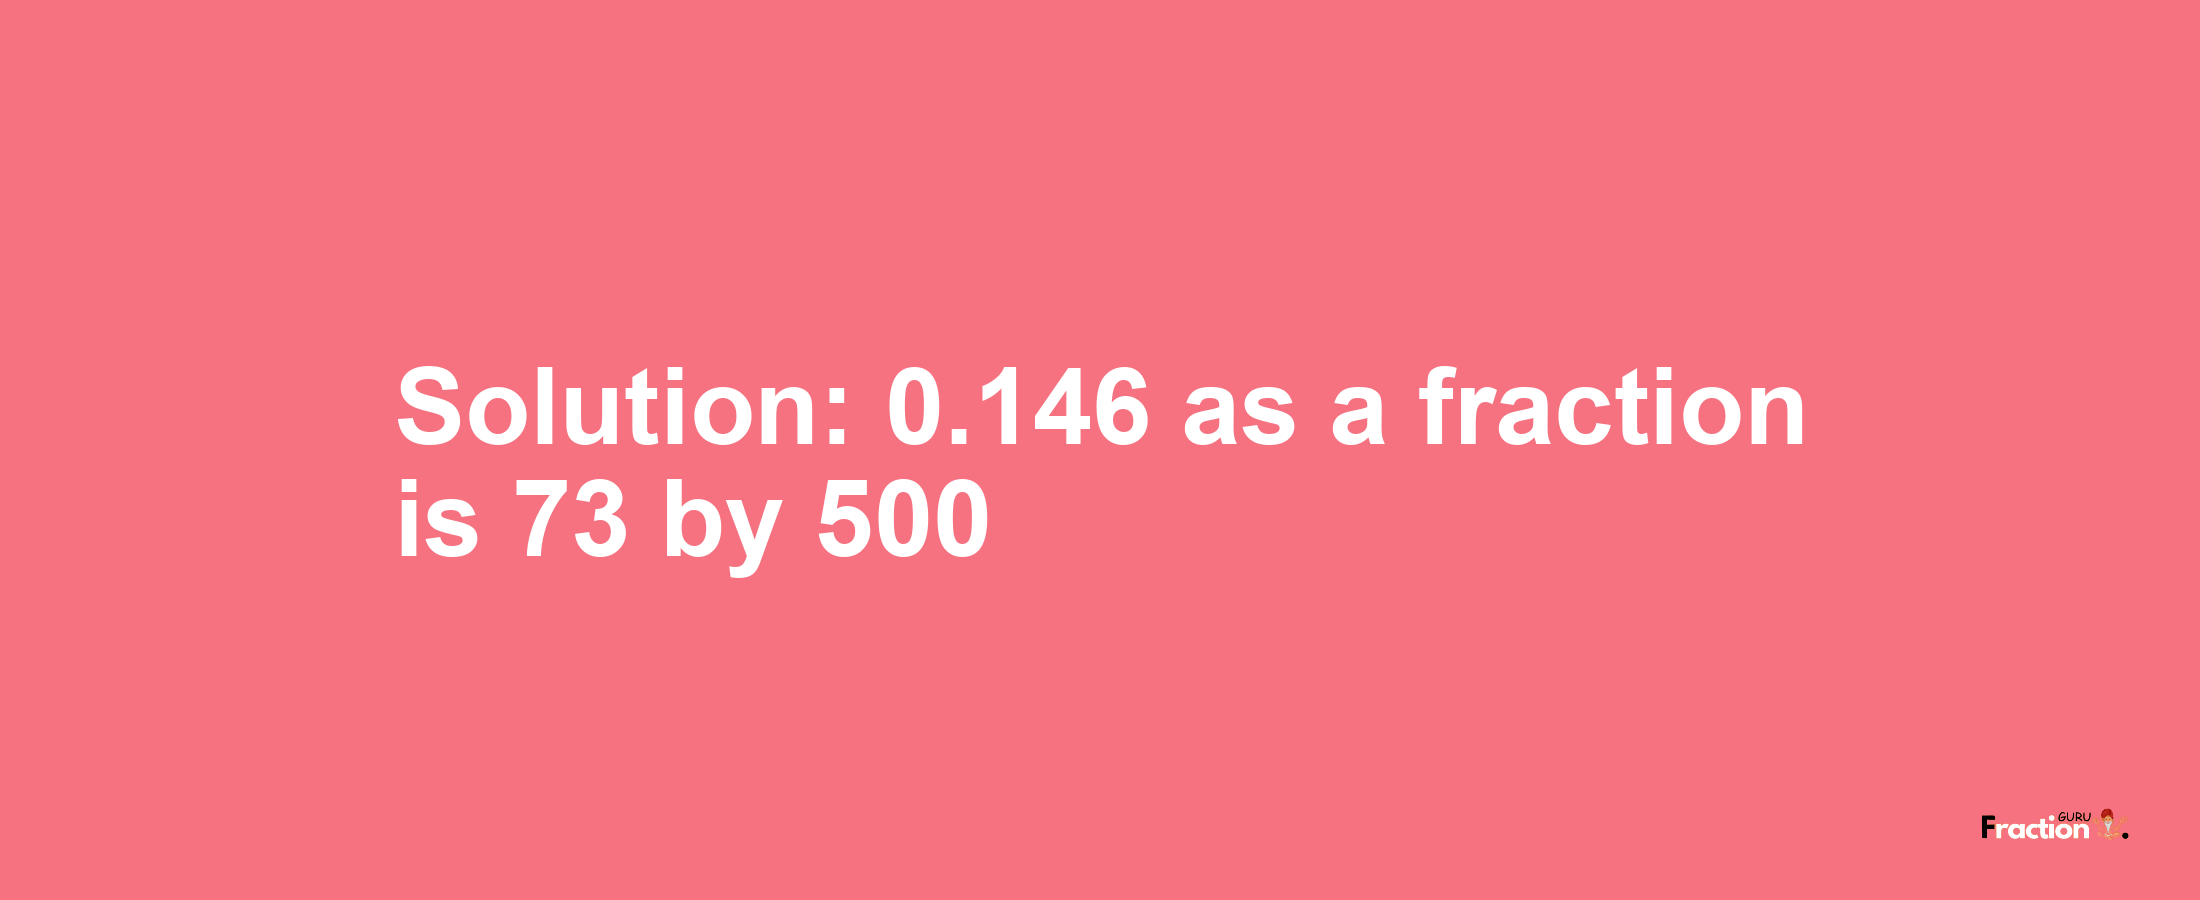 Solution:0.146 as a fraction is 73/500